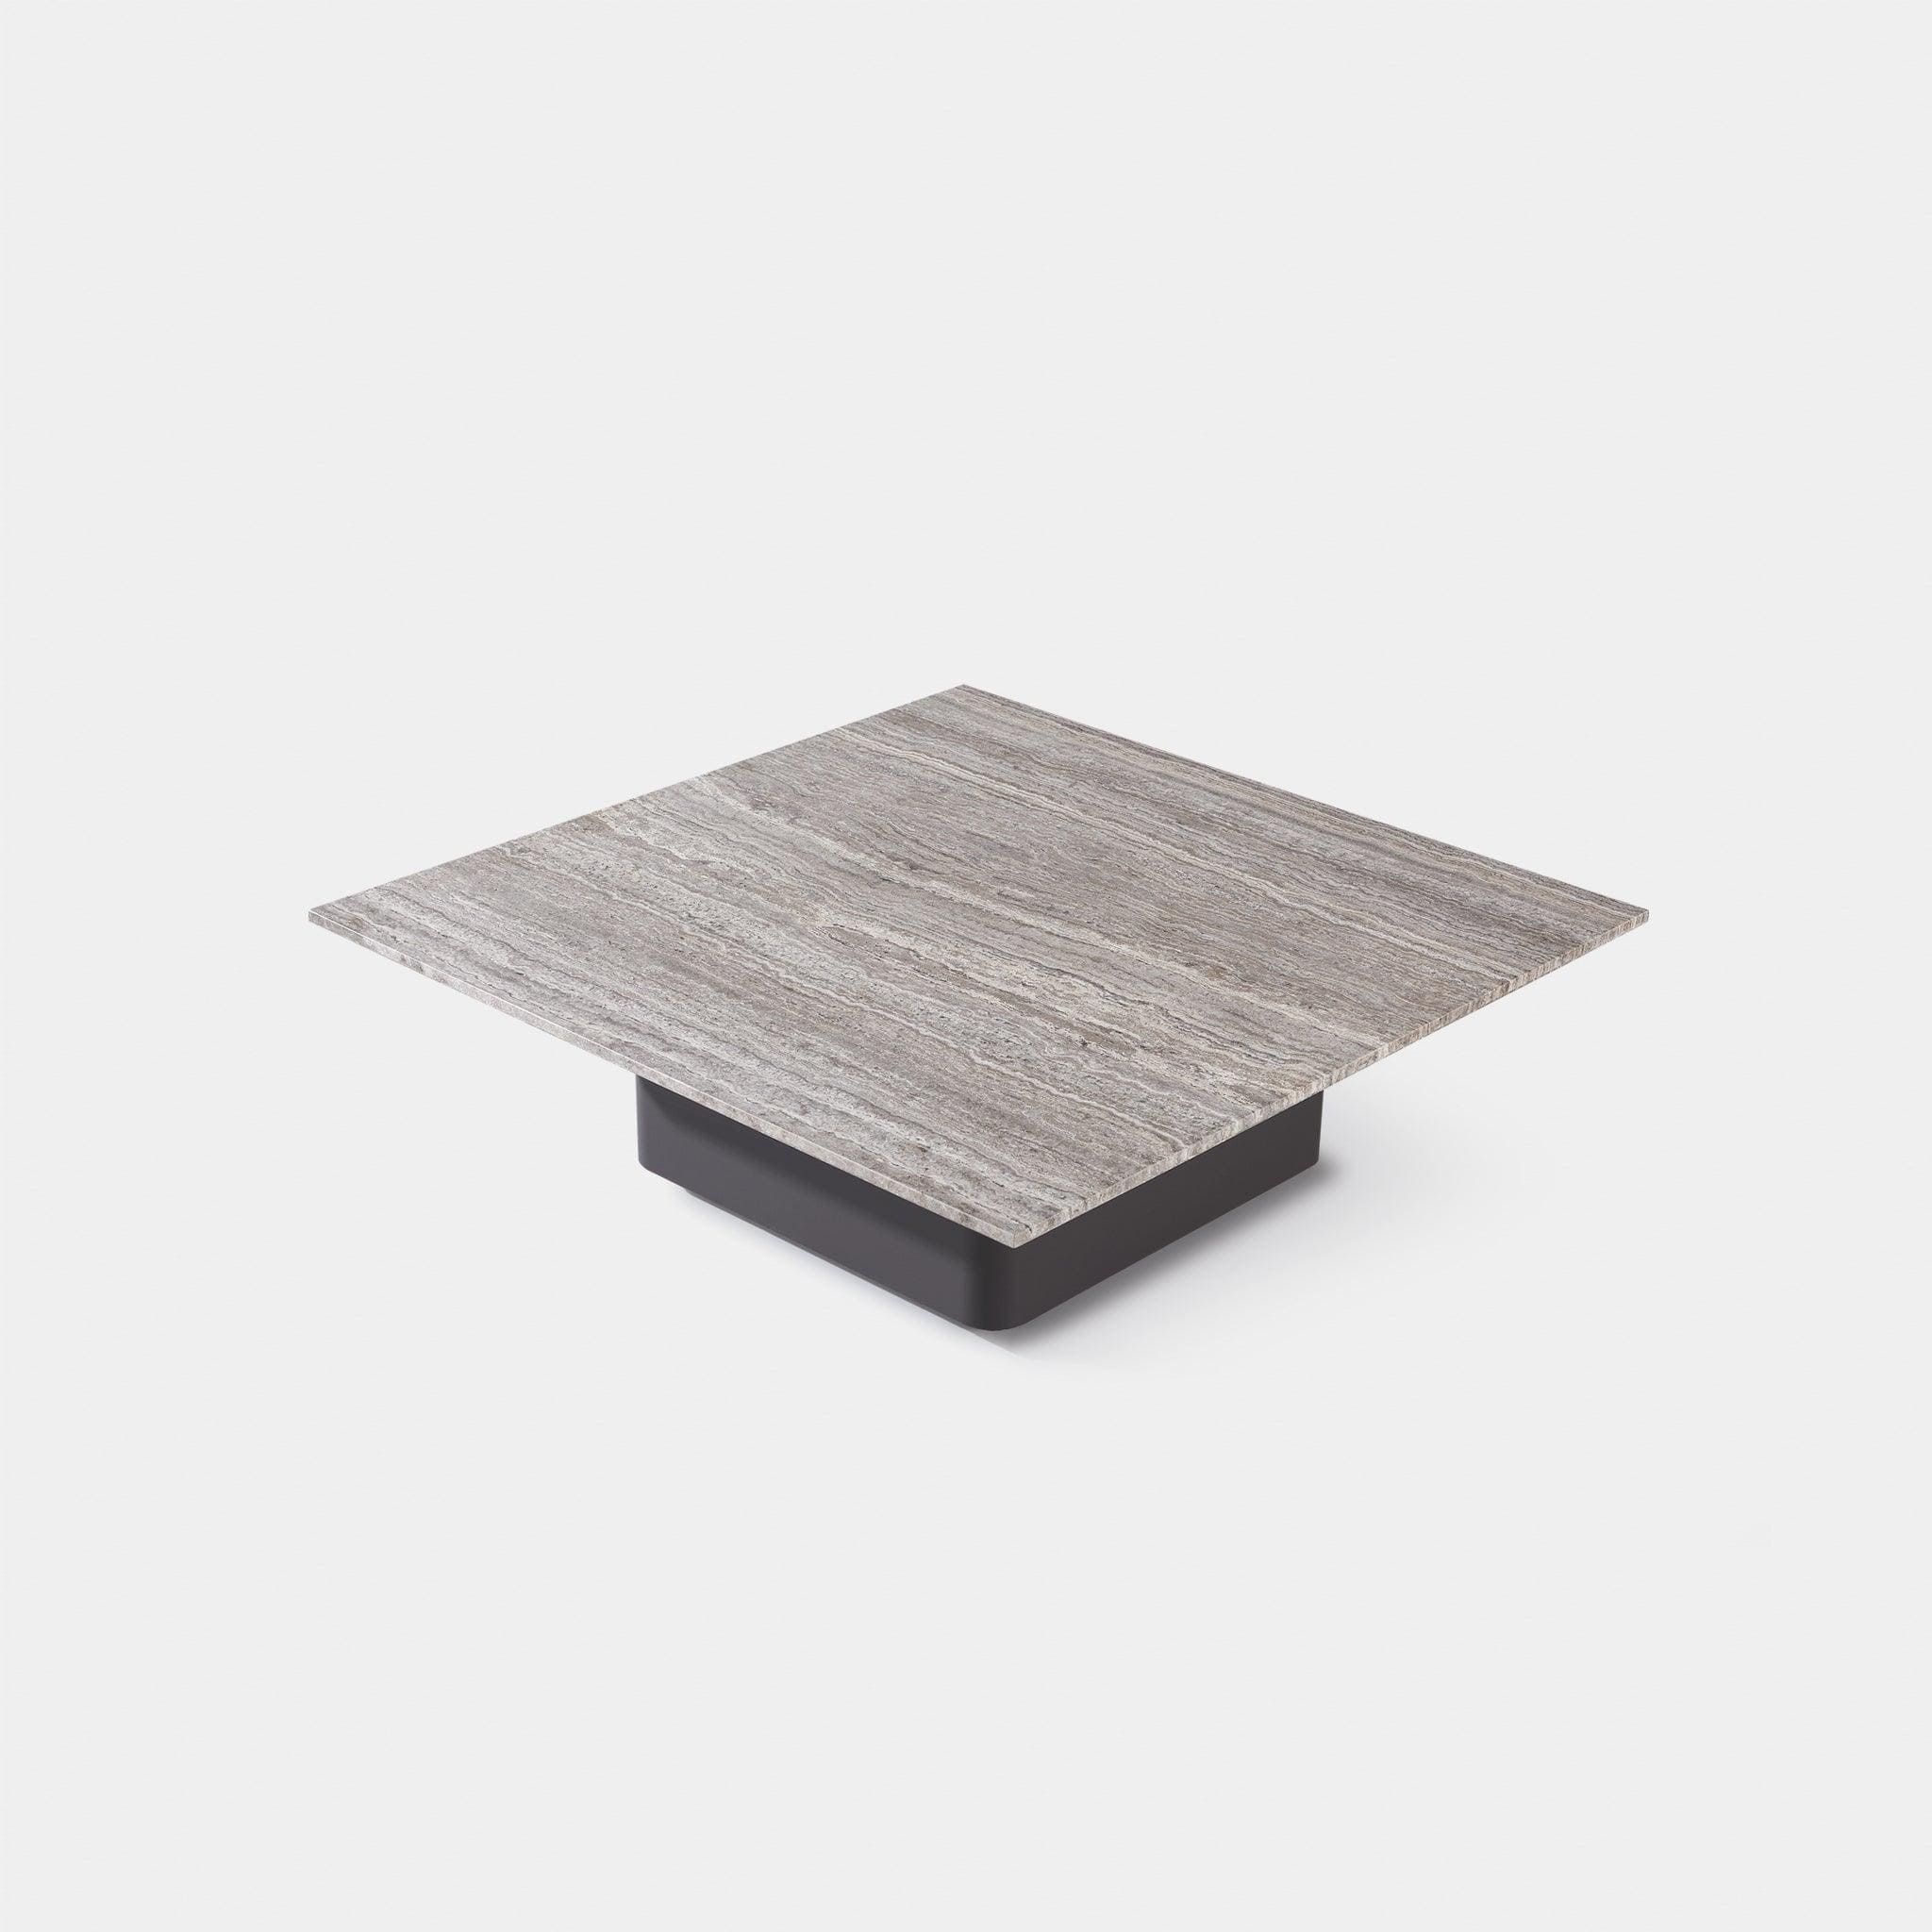 Boxhill's Santorini Outdoor Stone Square Side Table Top View